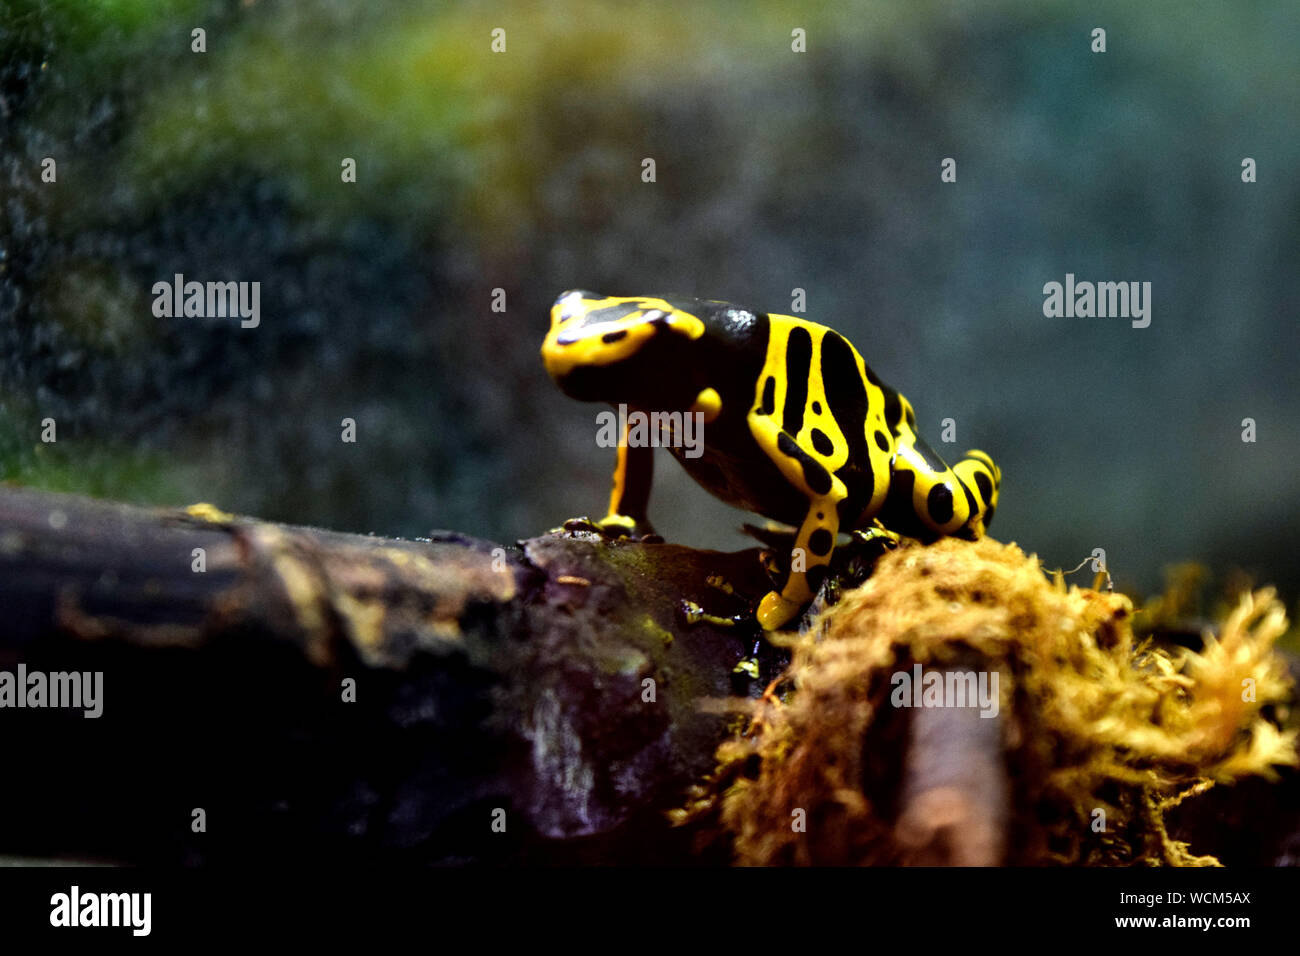 Yellow-banded Poison Arrow Frog At Zoo Stock Photo